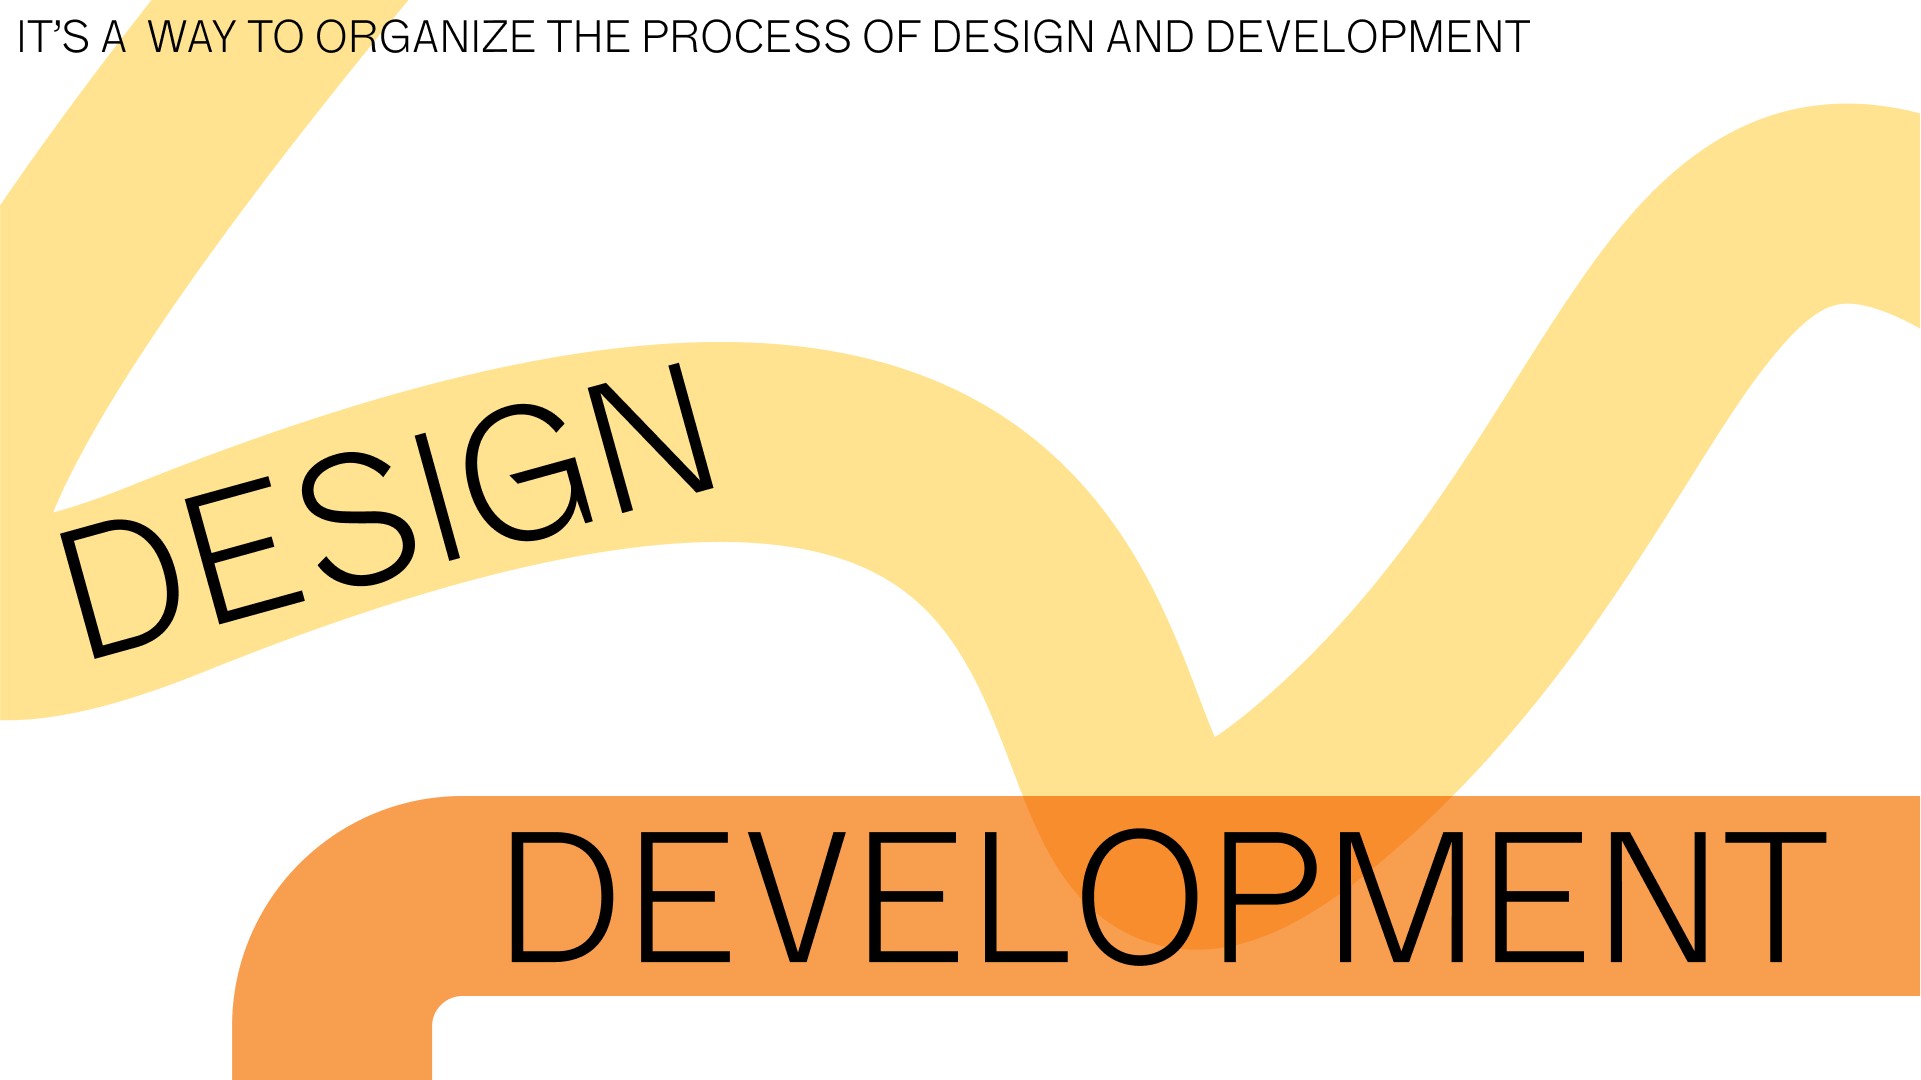 Design and development as two independent lines that don't curve or match together.